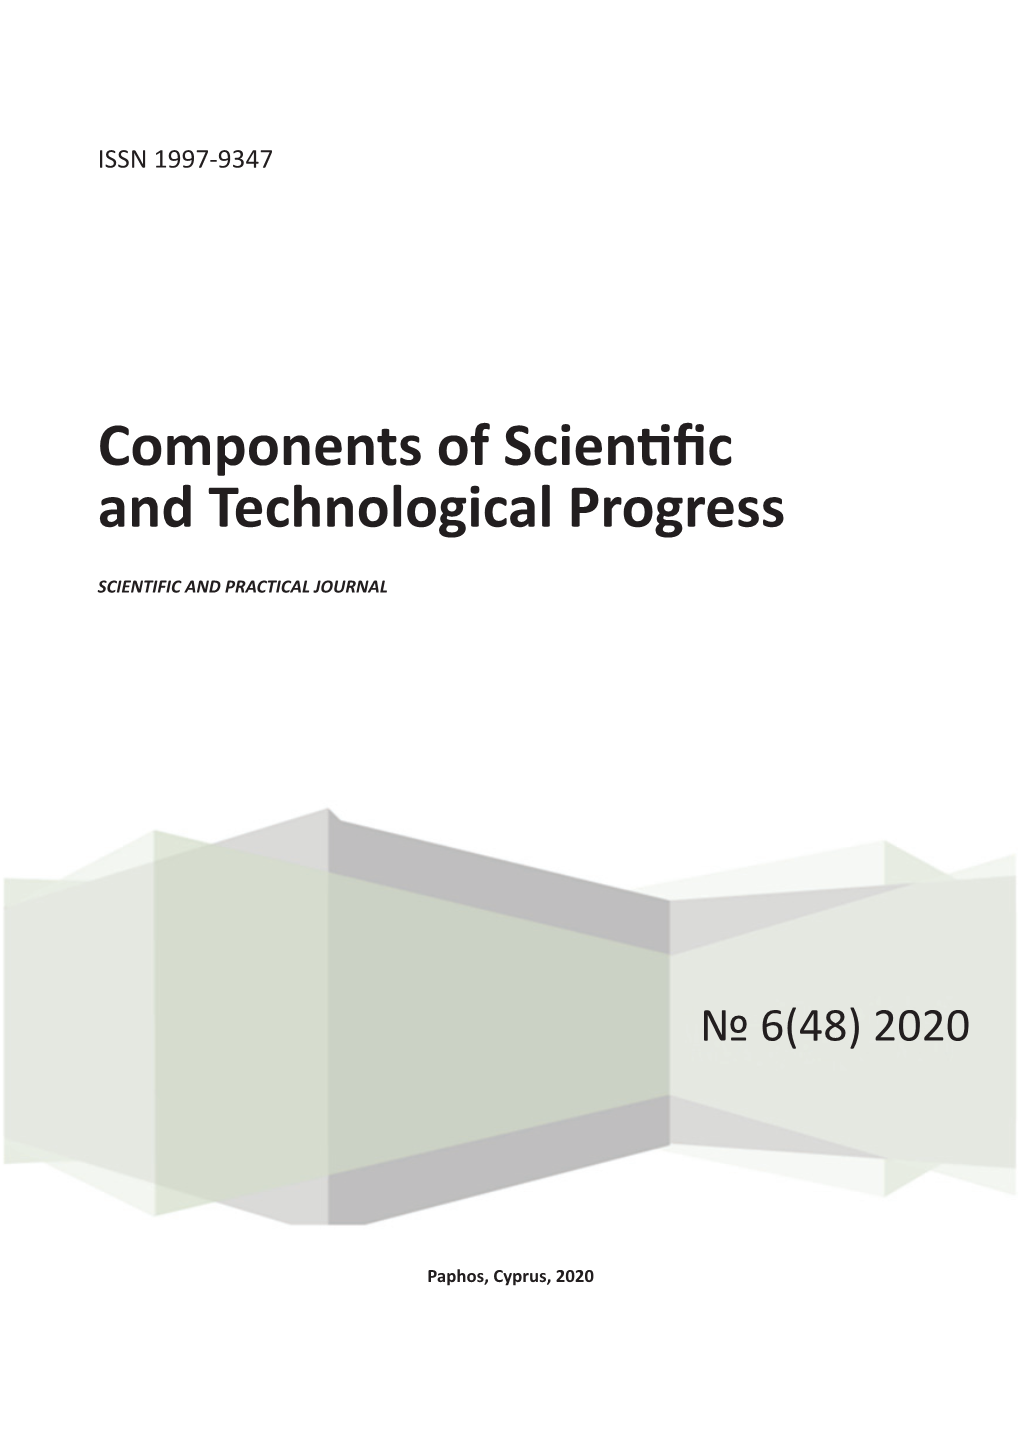 Components of Scientific and Technological Progress